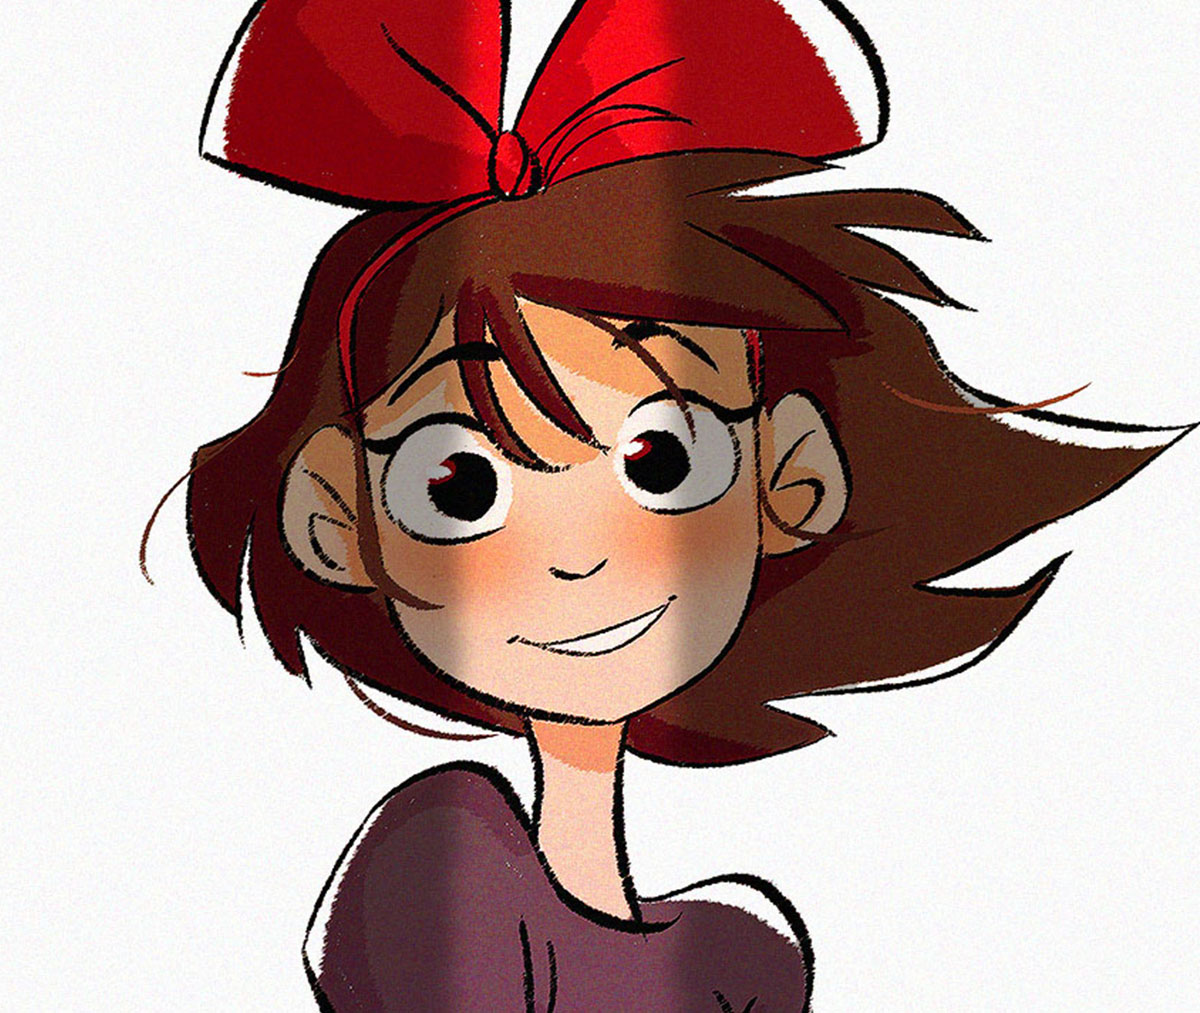 Bianca Siercke I Love Kiki S Delivery Service So Much I Think This Image Would Be Called When A New Door Opens Drawing Color Kiki Kikisdeliveryservice Miyazaki Ghibli 魔女の宅急便 魔女の宅急便キキ